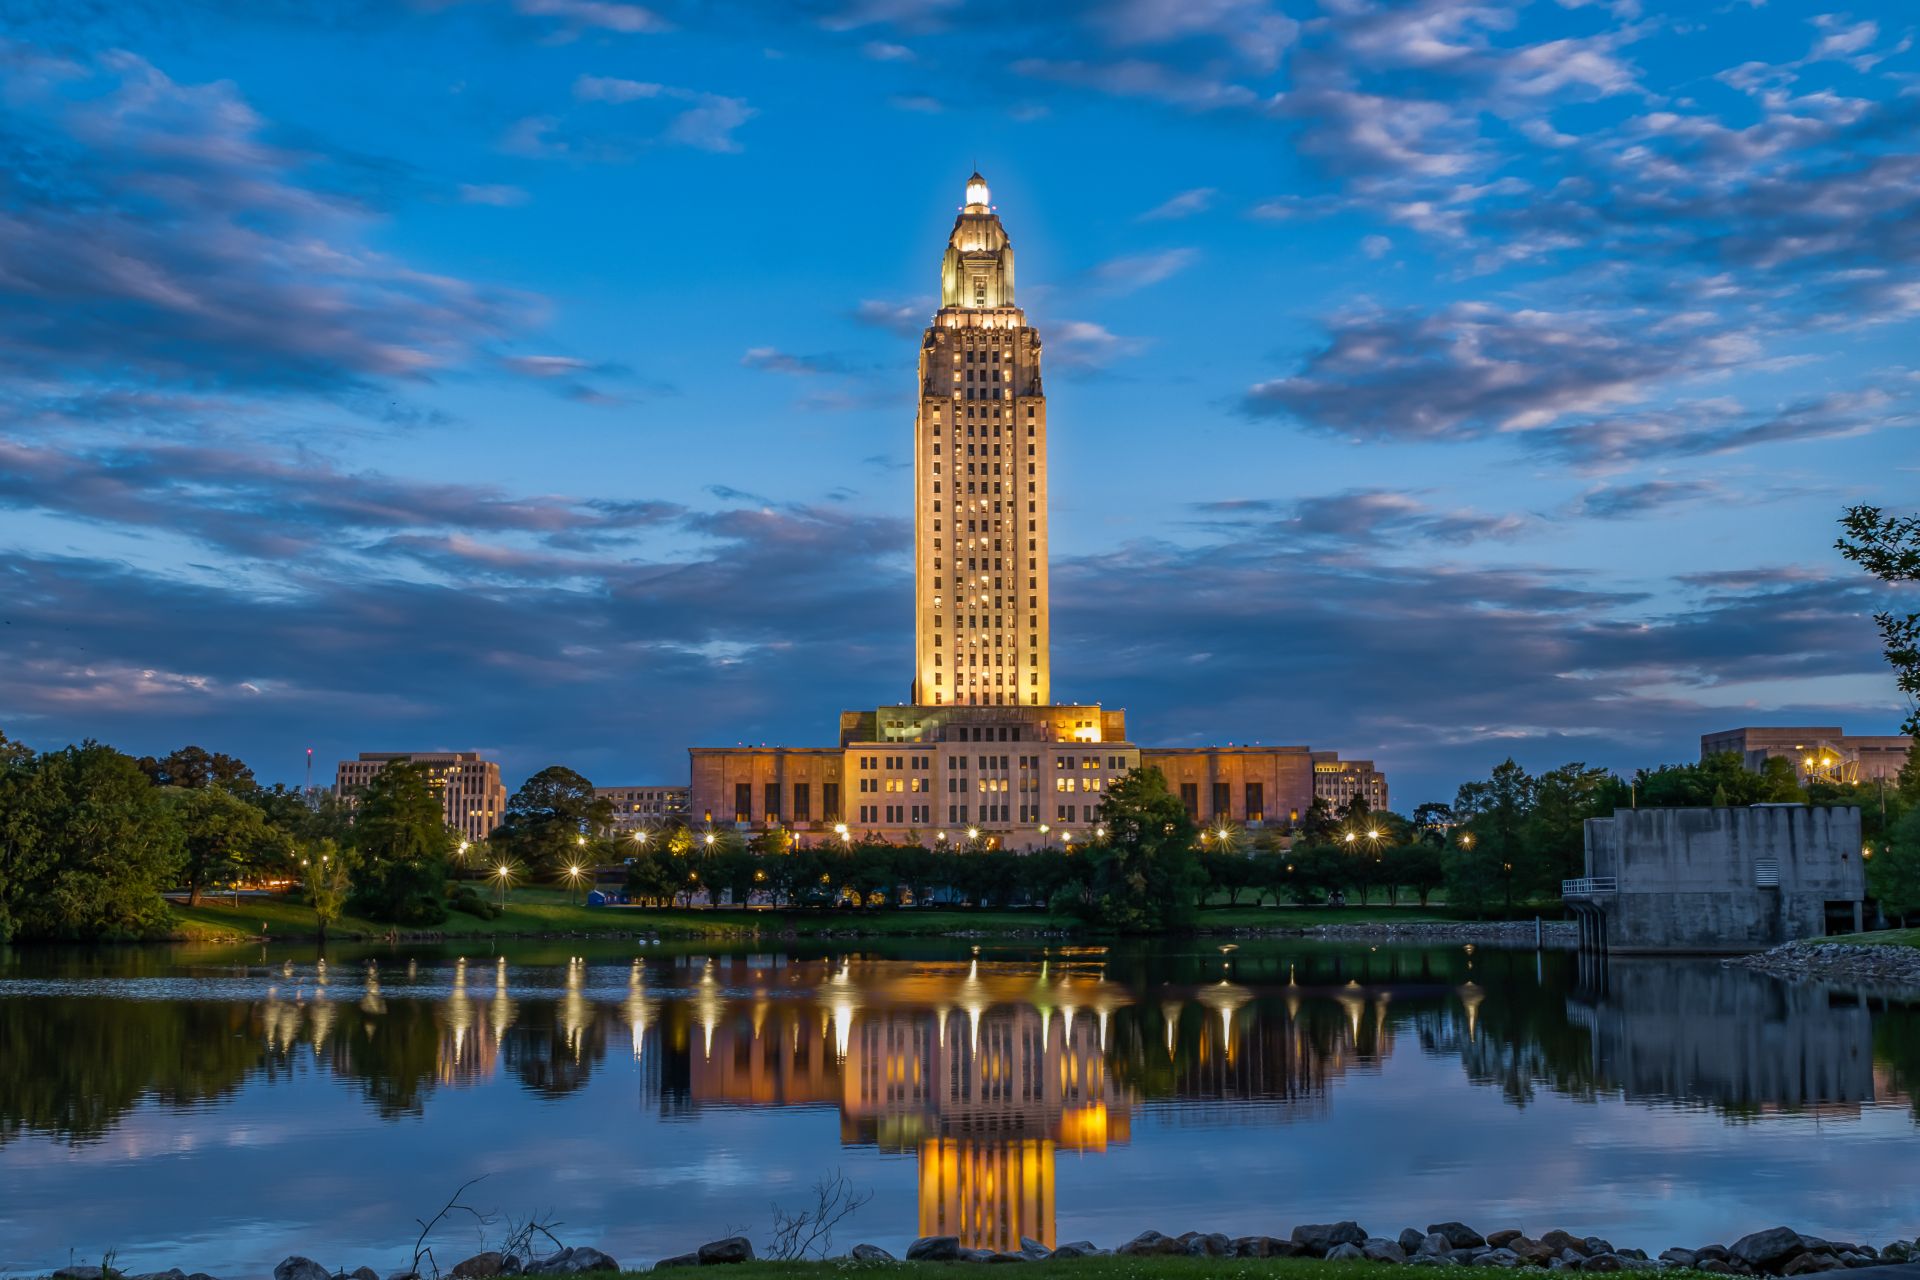 Baton Rouge at the Luisana State Capitol